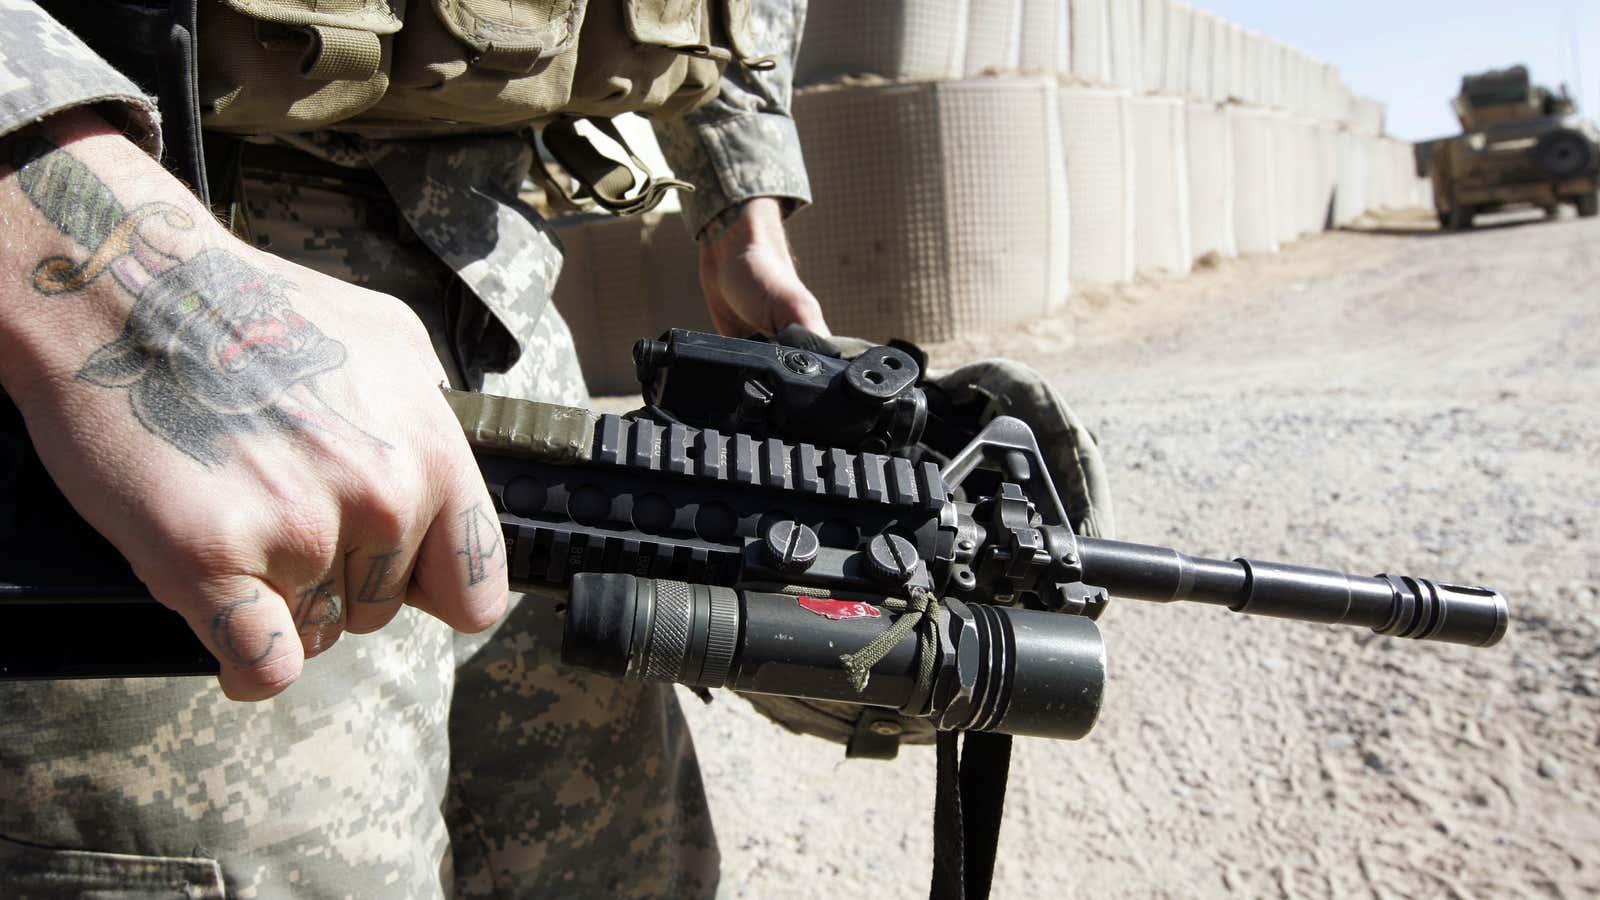 The M16, held by an American.